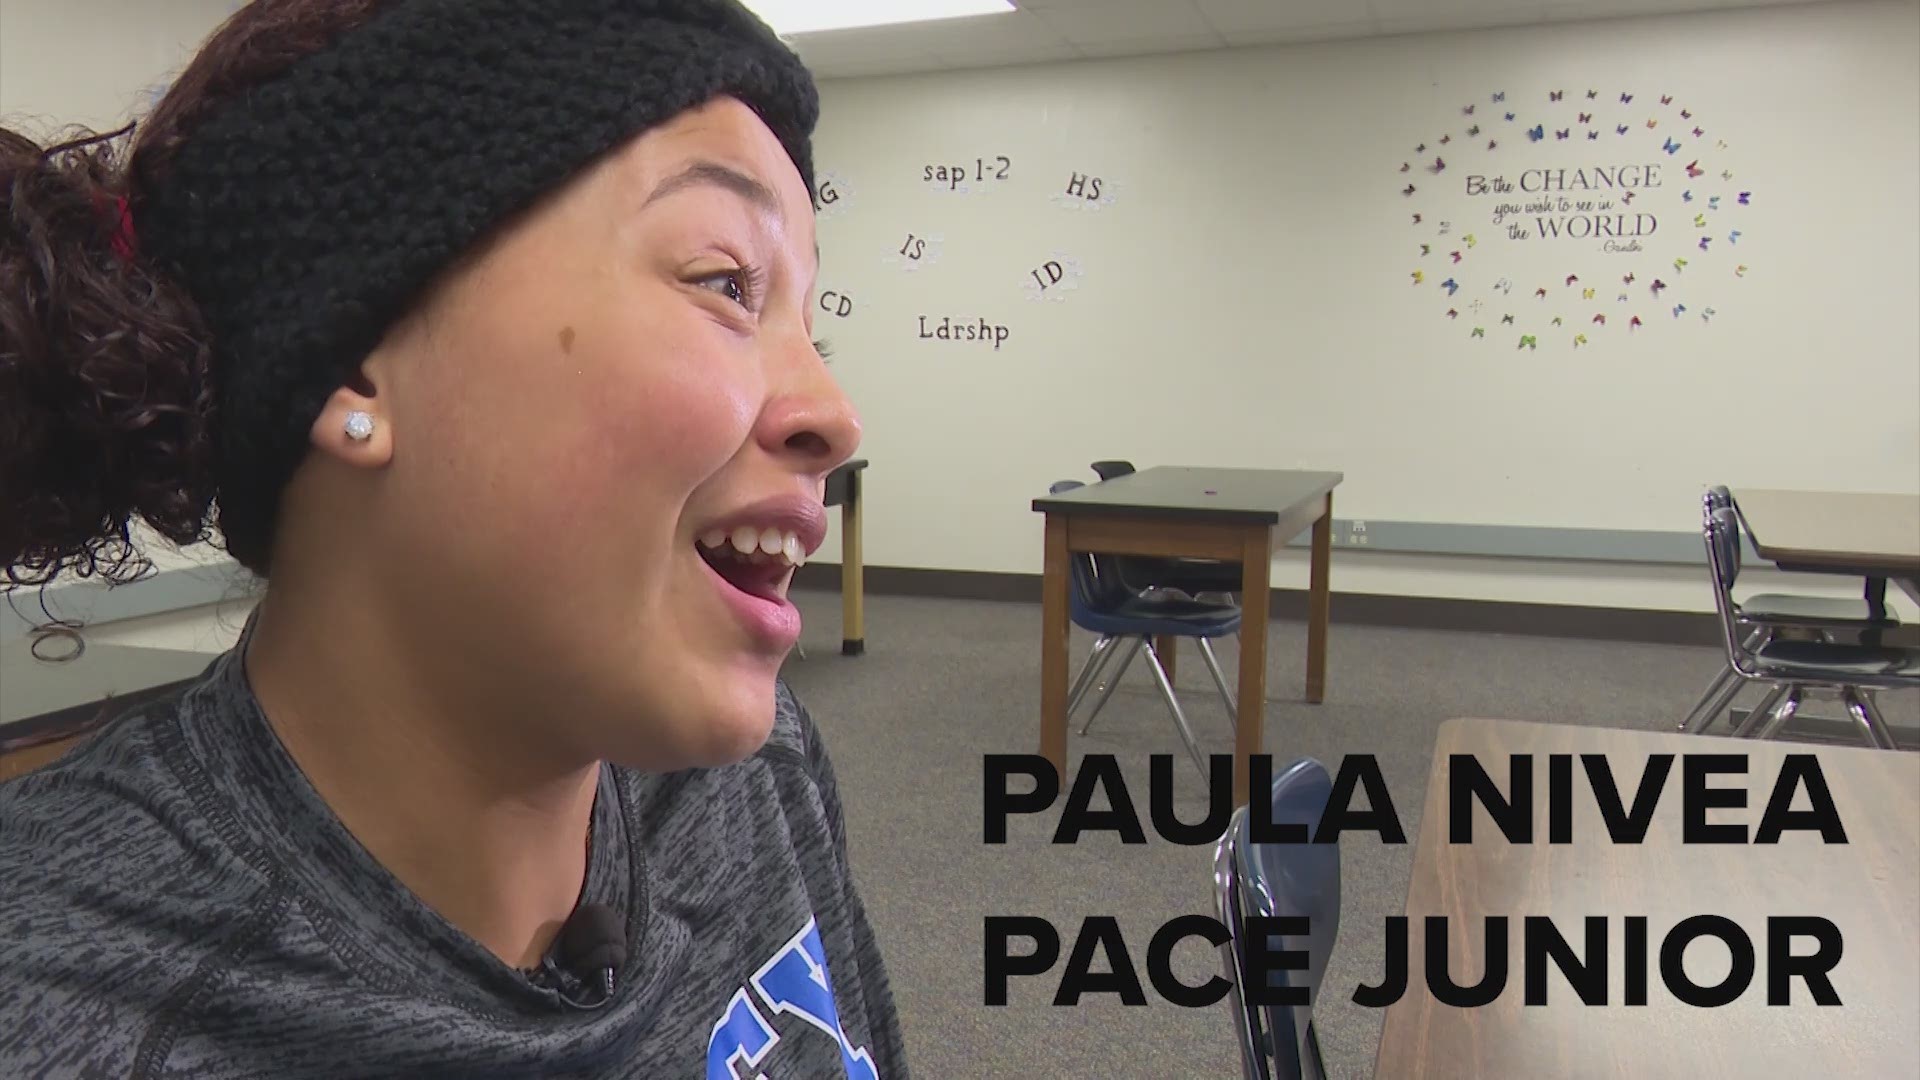 Two students who struggled at previous high schools are now finding success at PACE High School. They said part of the reason is the "phone-free" approach.